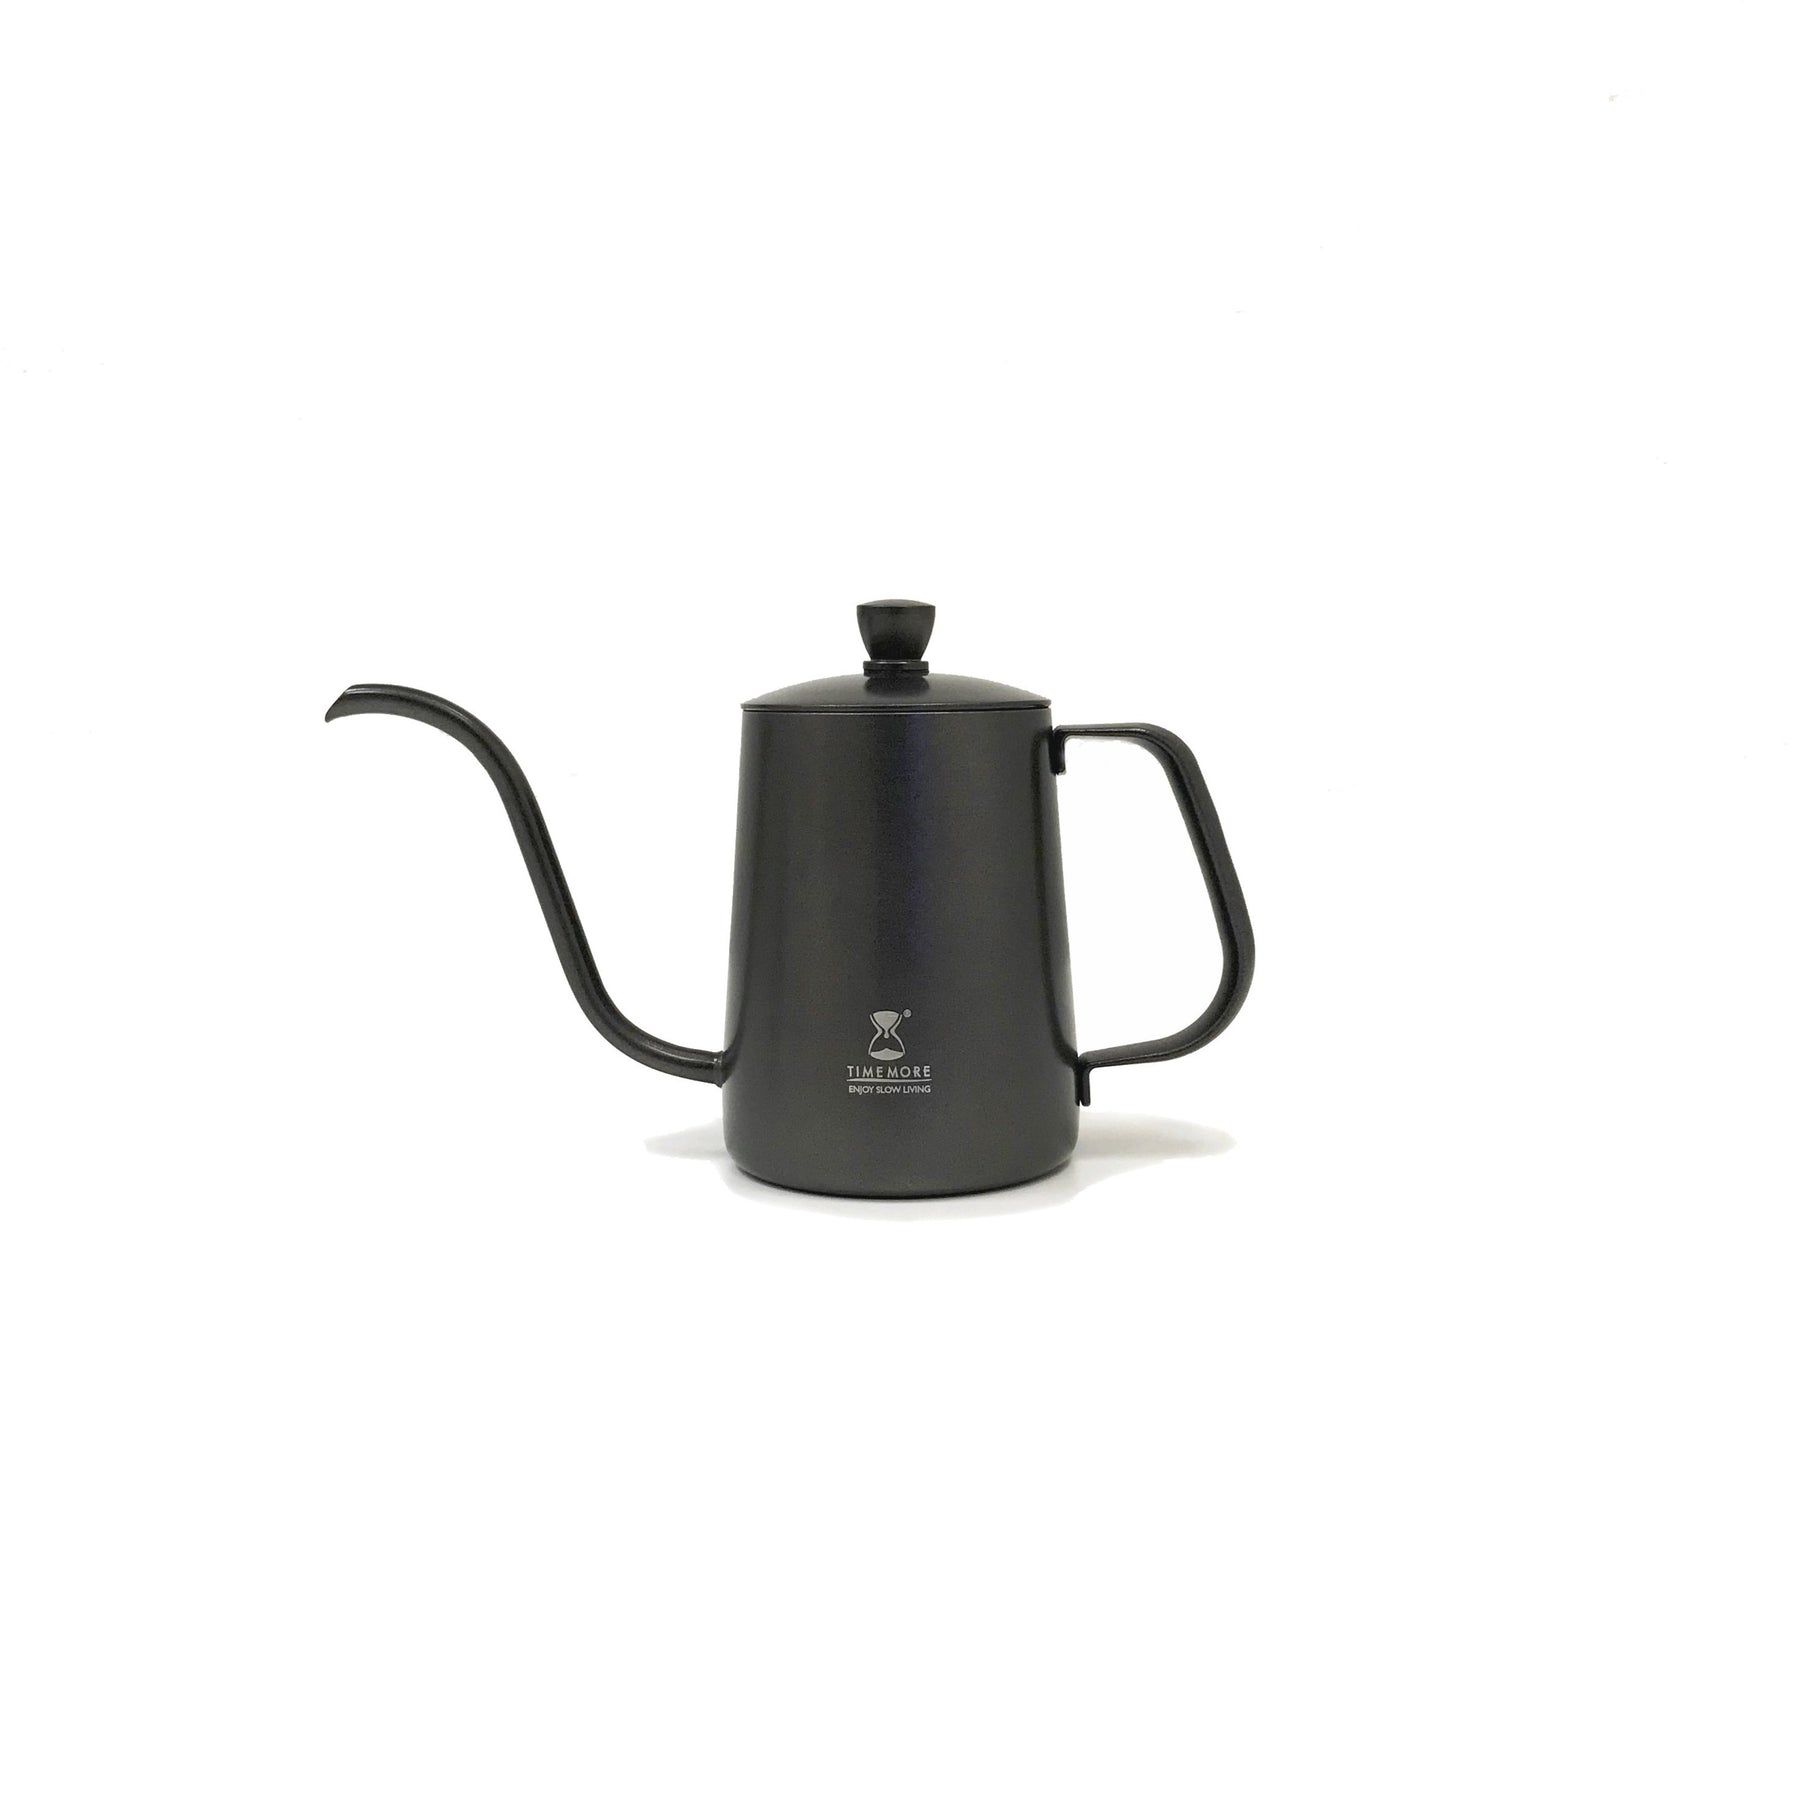 Timemore Kettle and Kalita Brewer Set